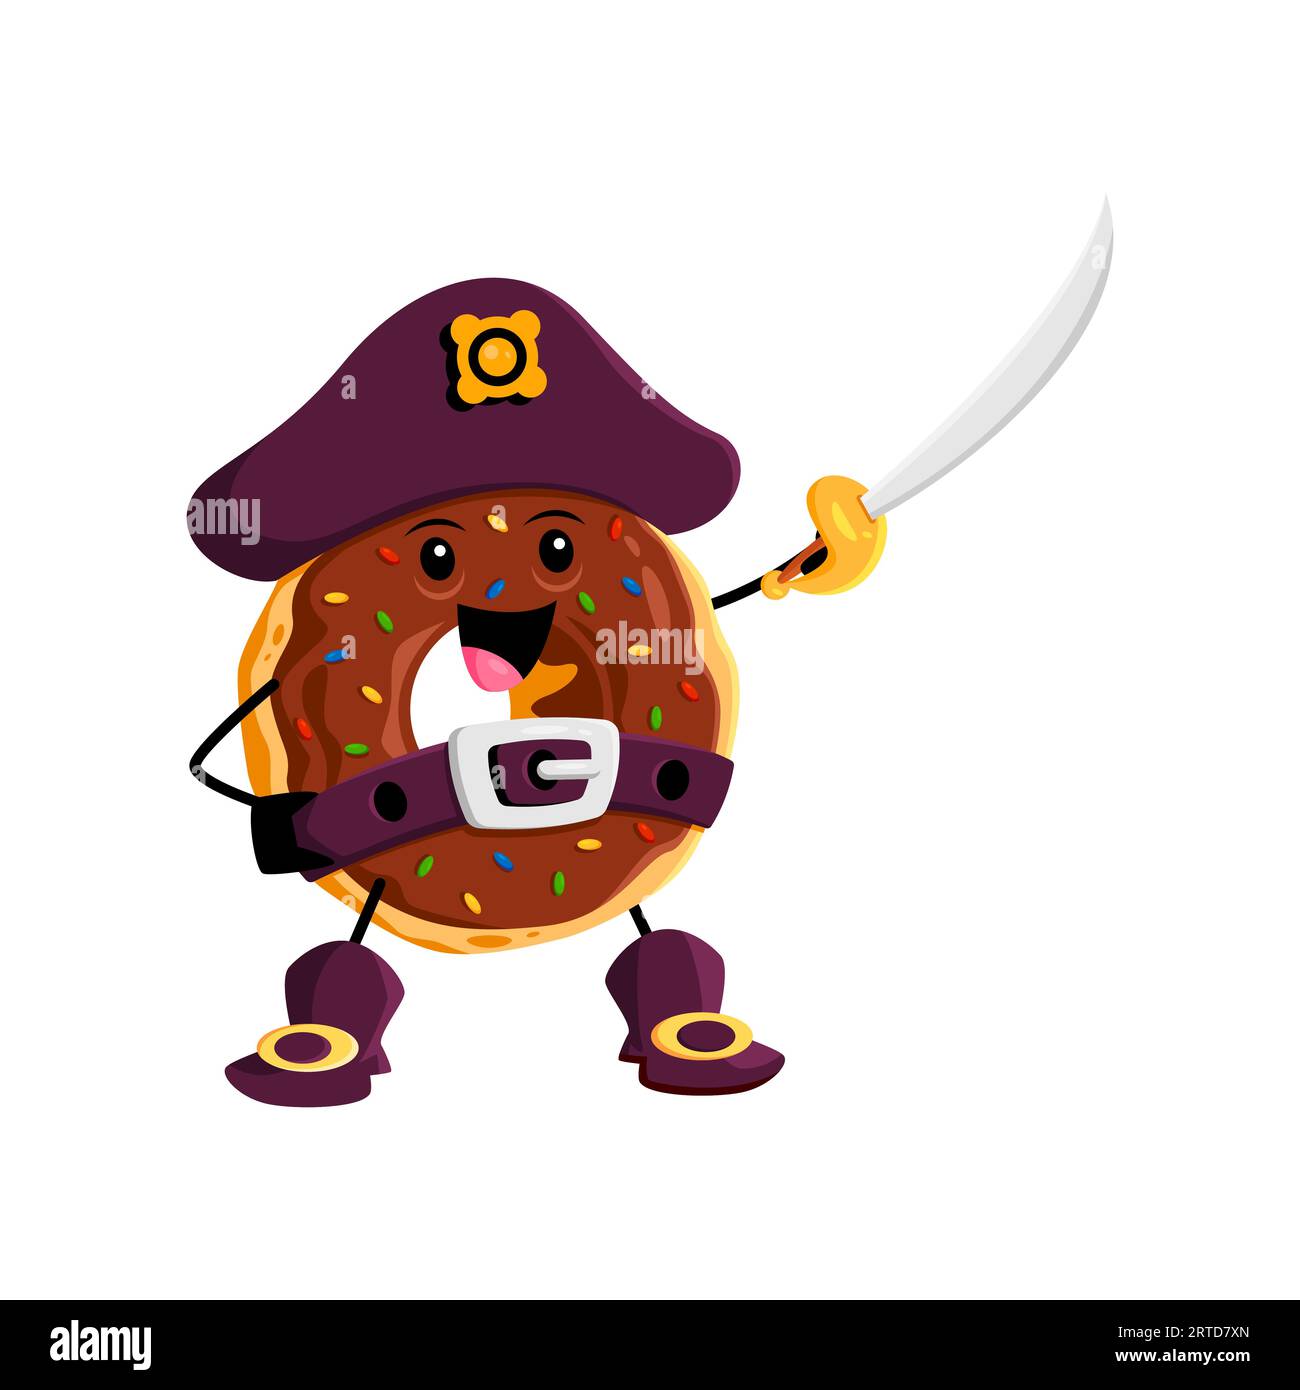 https://c8.alamy.com/comp/2RTD7XN/cartoon-fast-food-donut-pirate-and-corsair-character-fast-food-cafe-sweet-pastry-privateer-cheerful-personage-street-restaurant-dessert-donut-filib-2RTD7XN.jpg